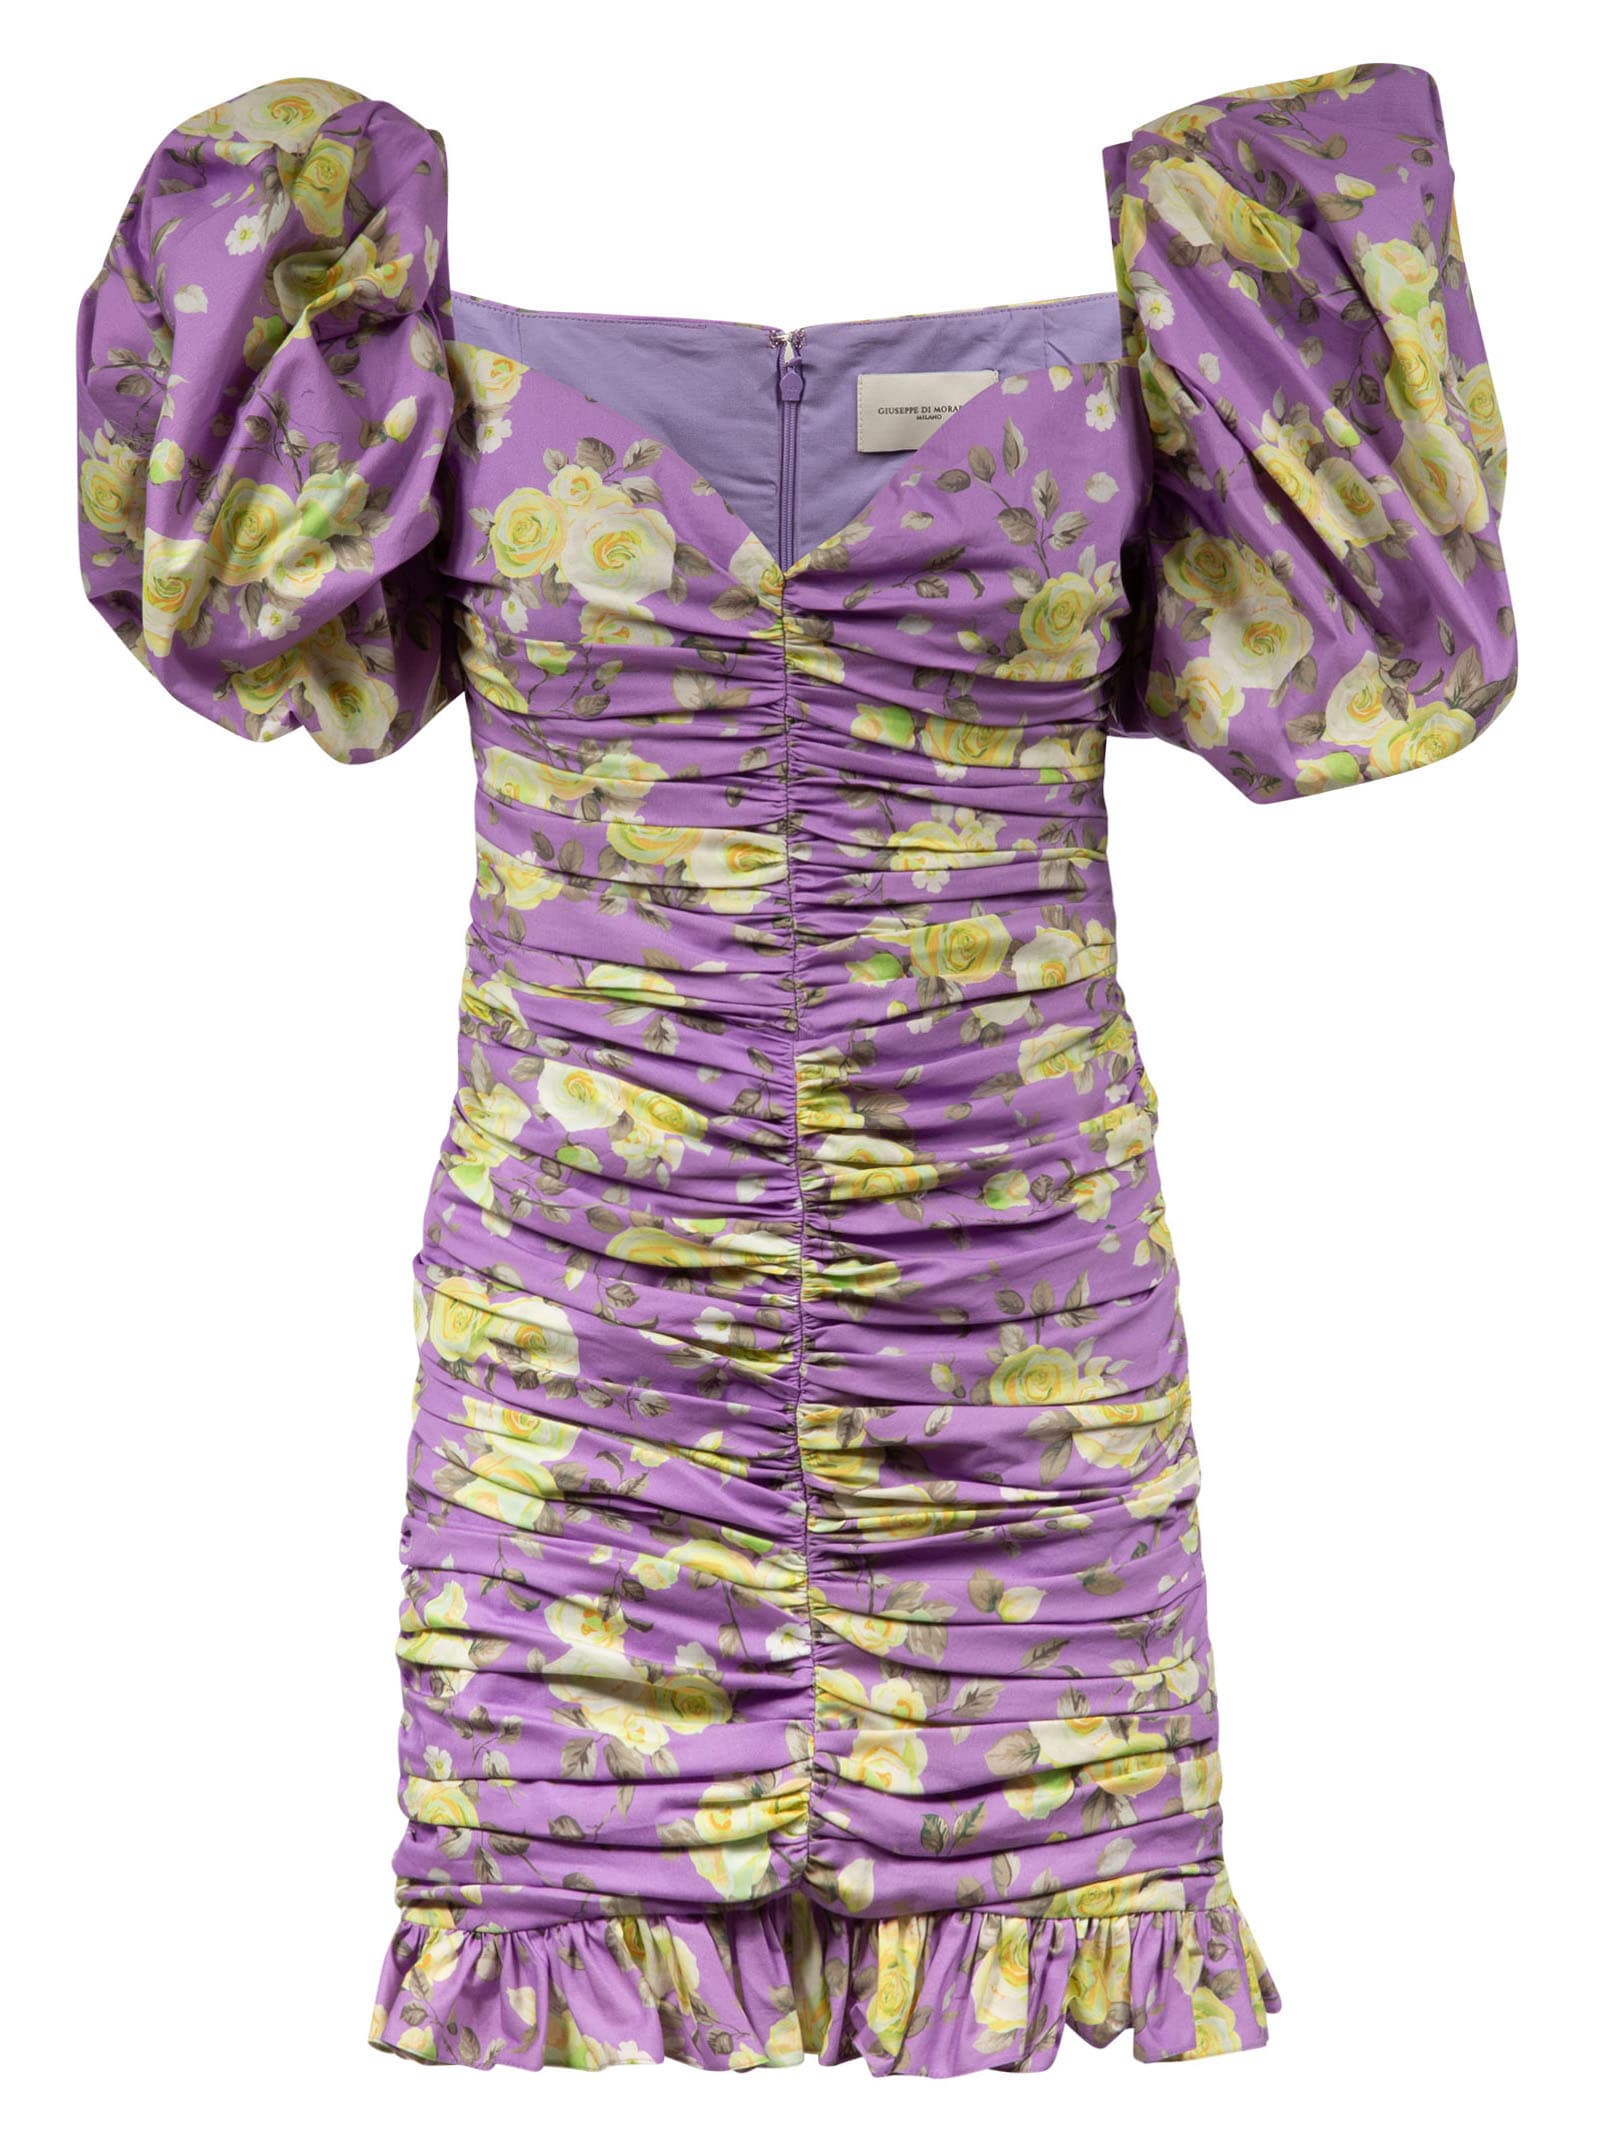 Giuseppe di Morabito Floral Print Fitted Dress